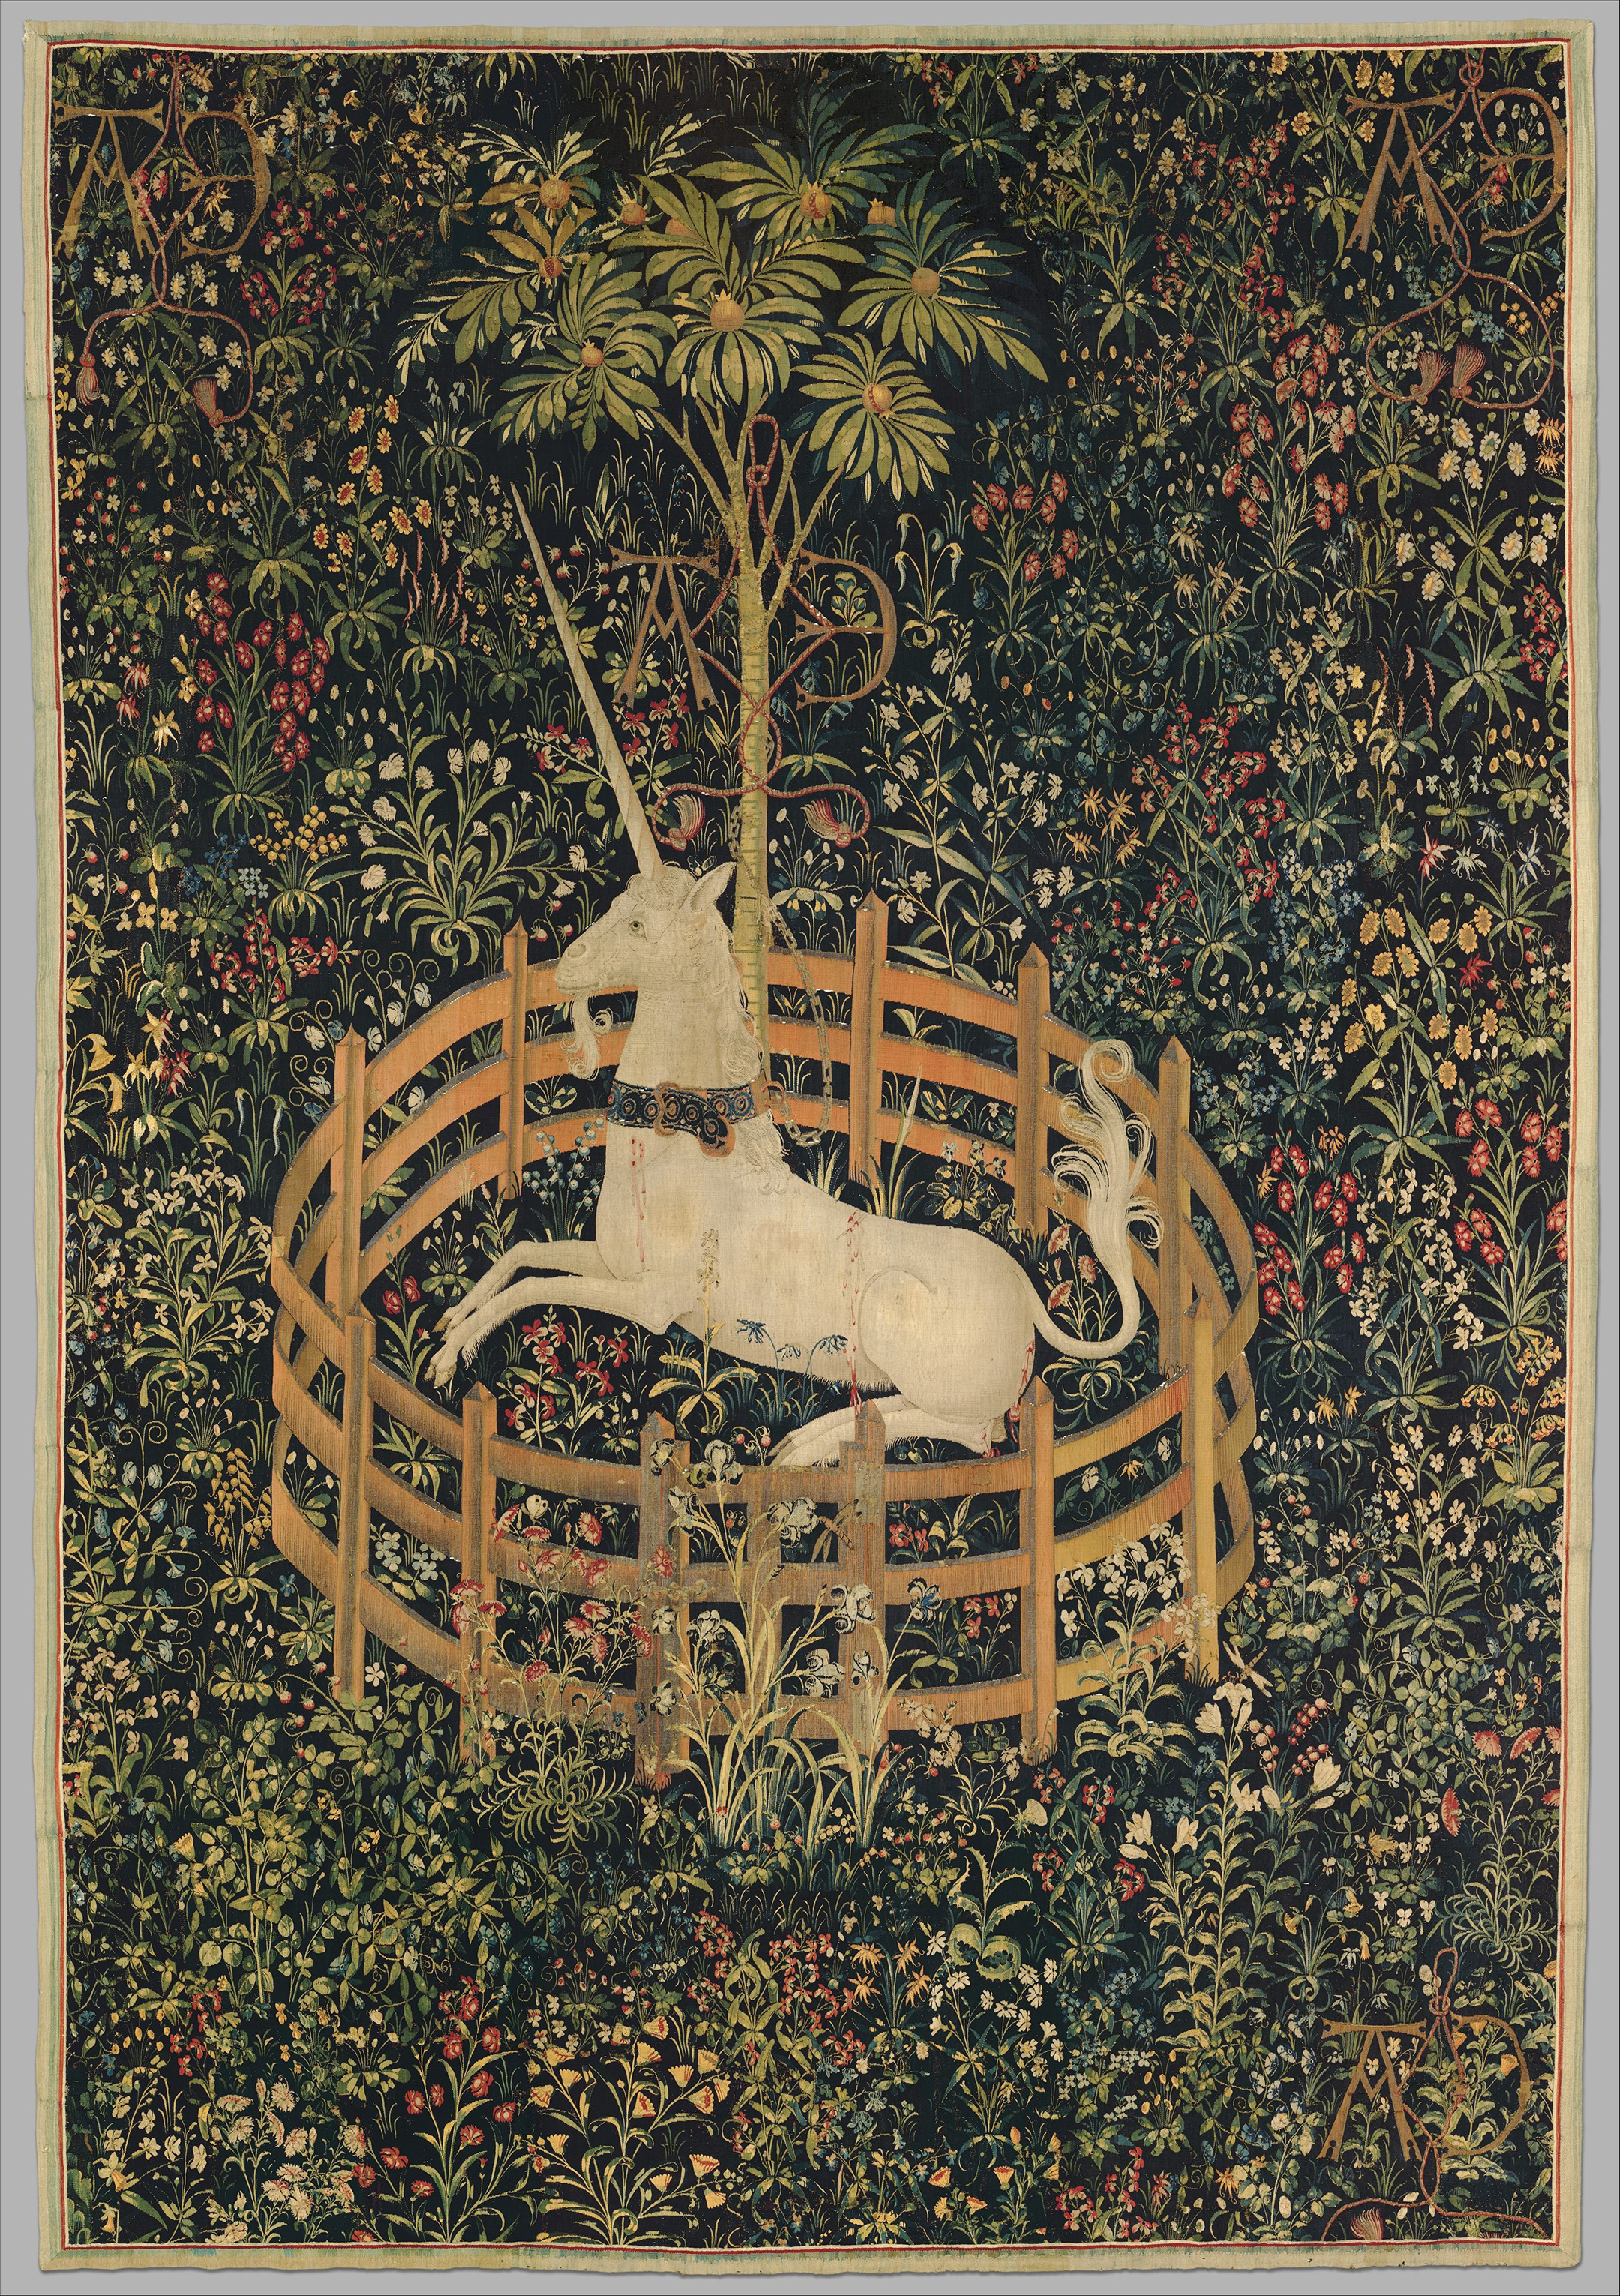 A tapestry depicting a white unicorn with a large horn in a fenced-in pen in a lush green garden